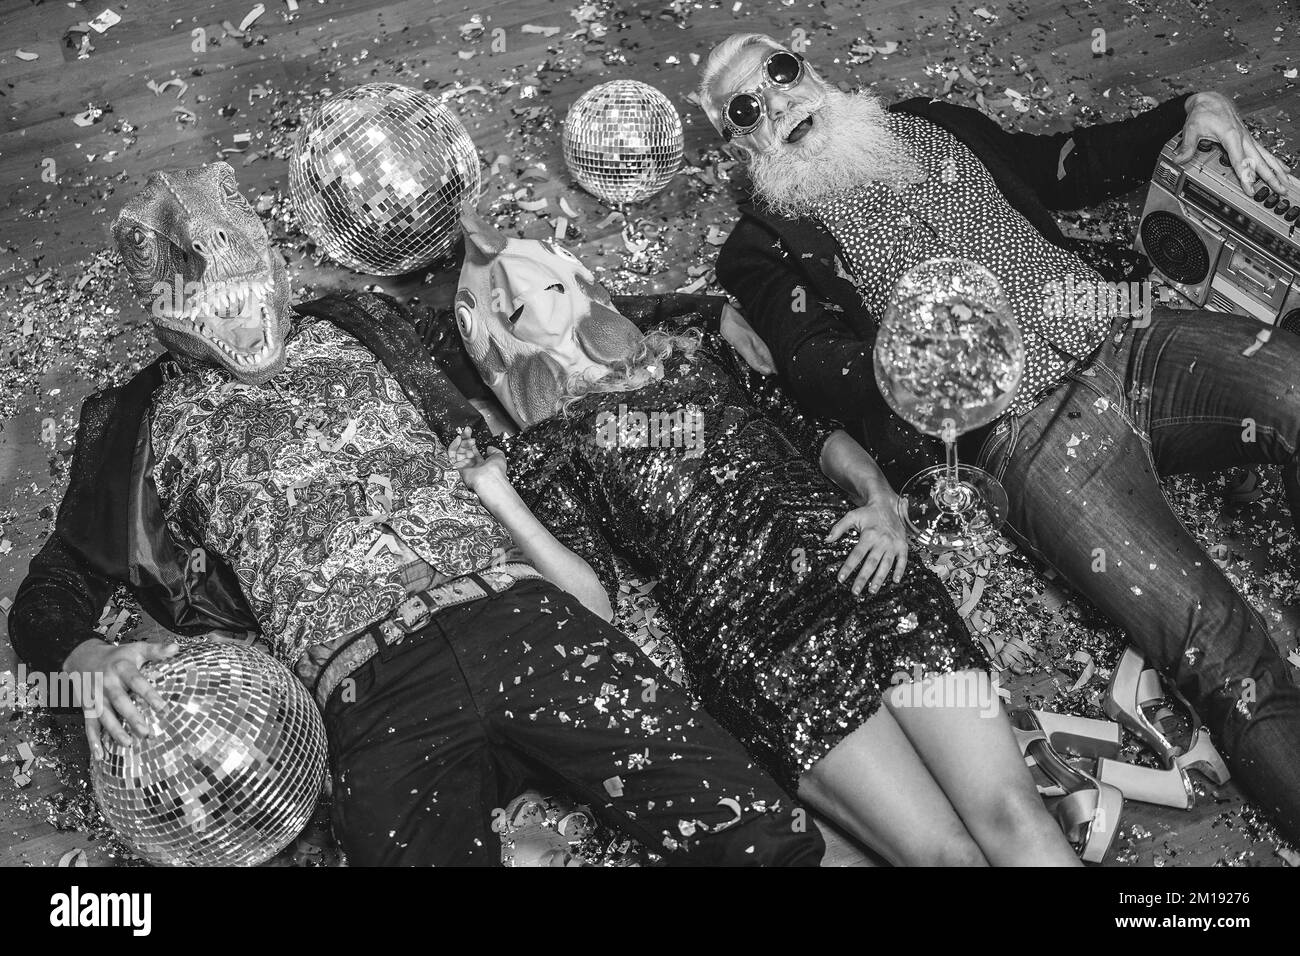 Crazy people celebrating carnival party inside nightclub - Focus on chicken mask - Black and white editing Stock Photo